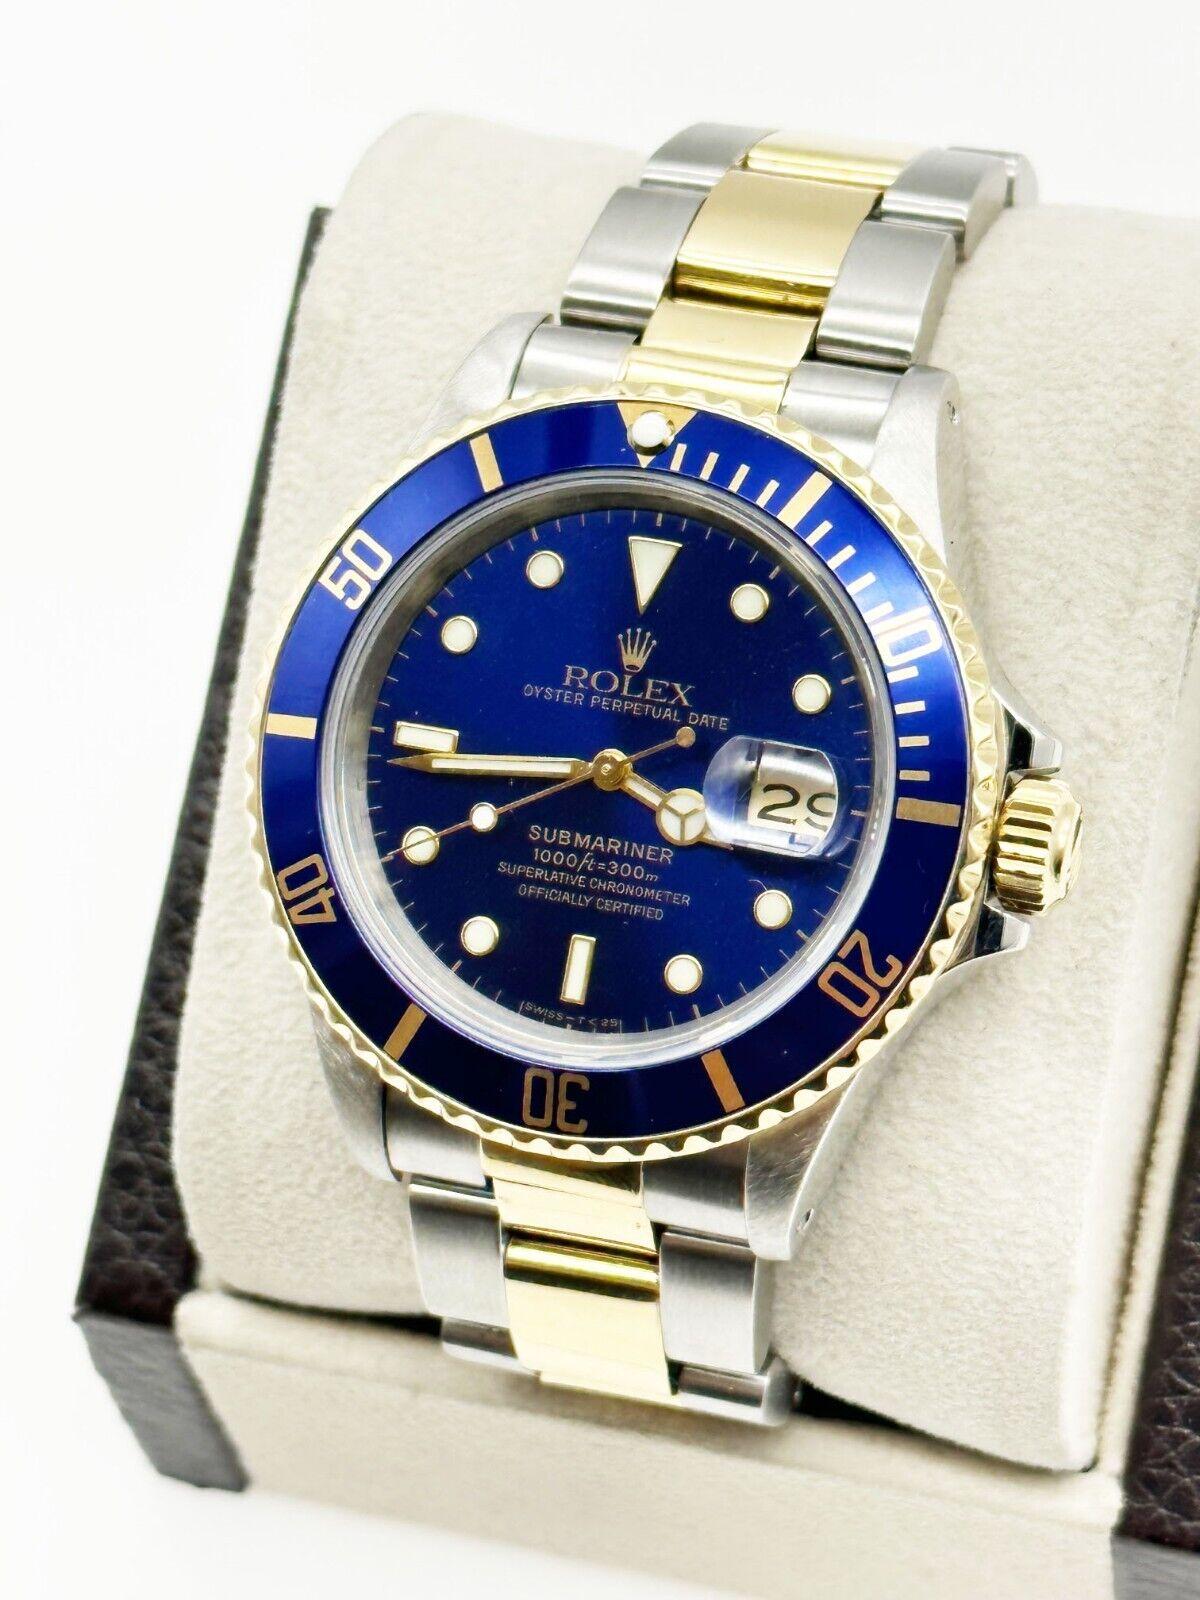 Style Number: 16803

 

Serial: 9160***


Year: 1986

 

Model: Submariner

 

Case Material: Stainless Steel 

 

Band: 18K Yellow Gold & Stainless Steel 

 

Bezel: Blue 

 

Dial: Blue

 

Face: Sapphire Crystal 

 

Case Size: 40mm 

